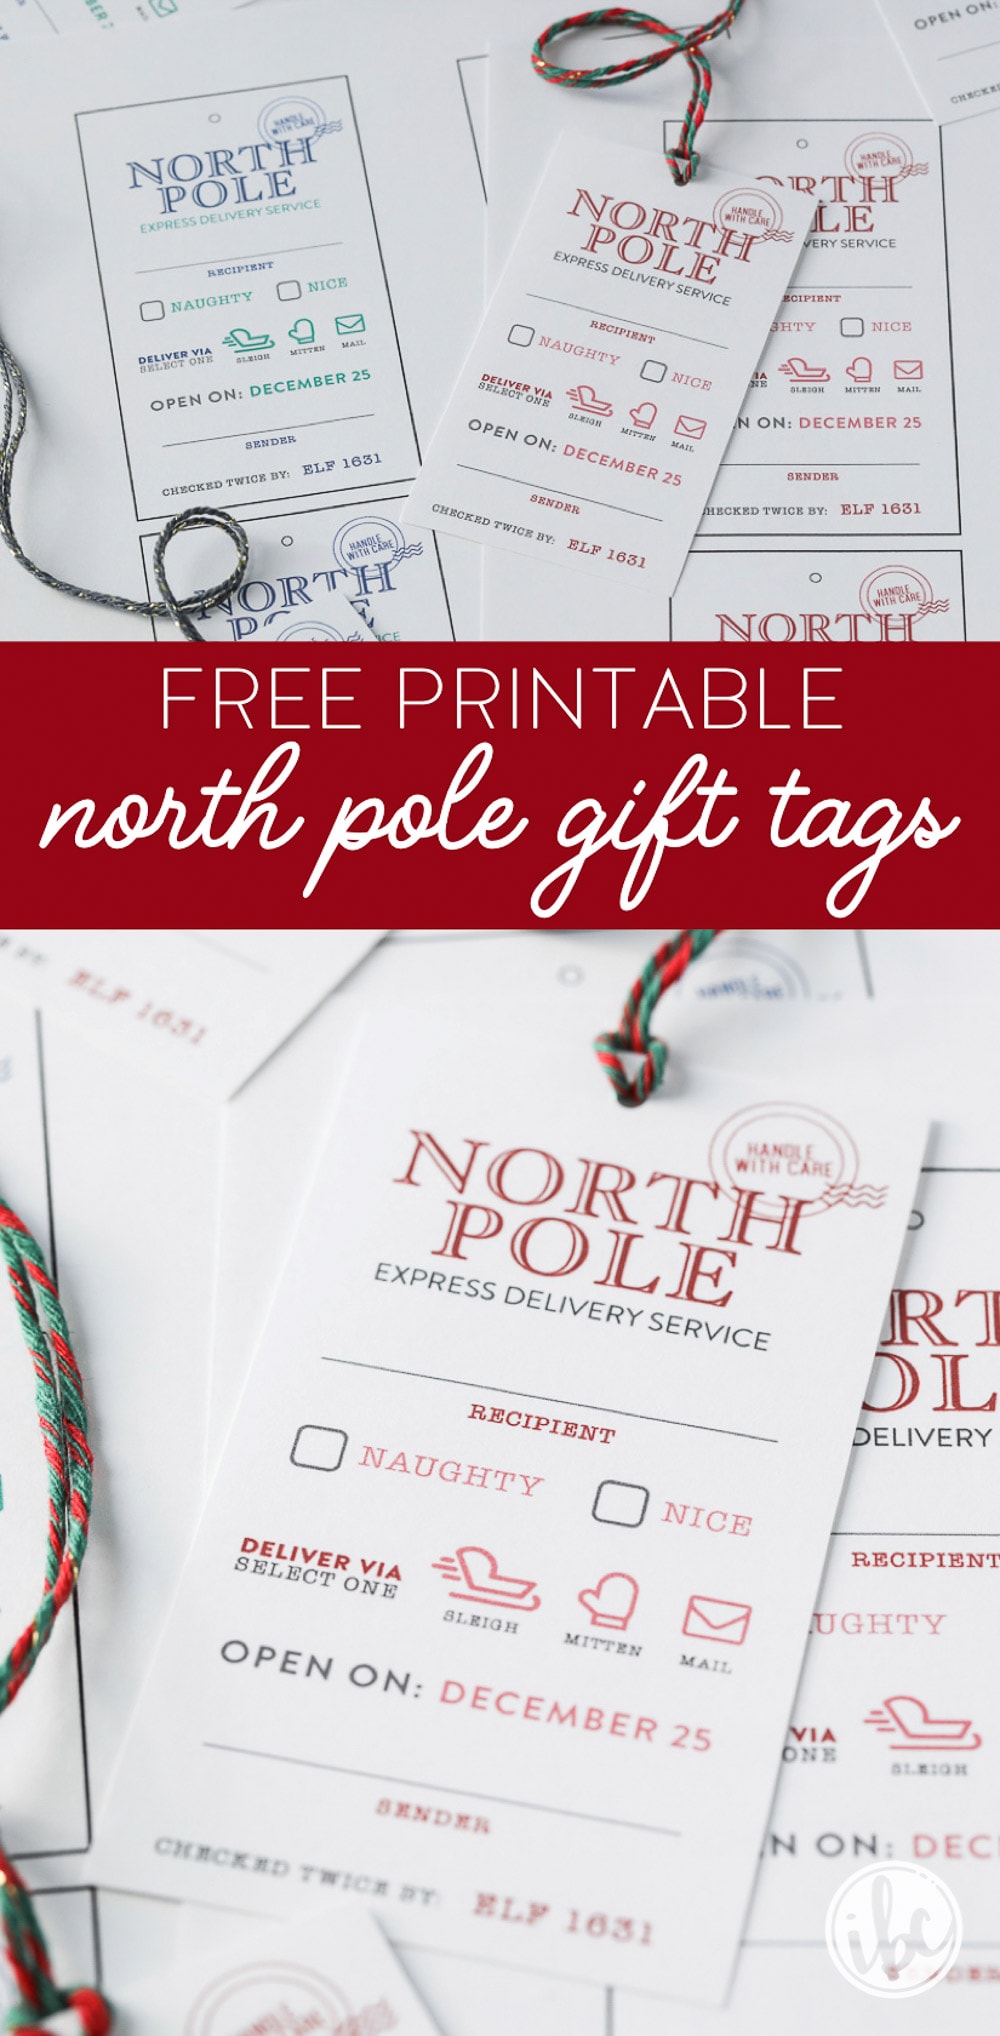 These North Pole-Inspired Printable Christmas Gift Tags are the perfect finishing touch on your holiday gift wrapping! #printable #christmas #gifttags #plaid #tags #holiday #wrapping #giftwrap